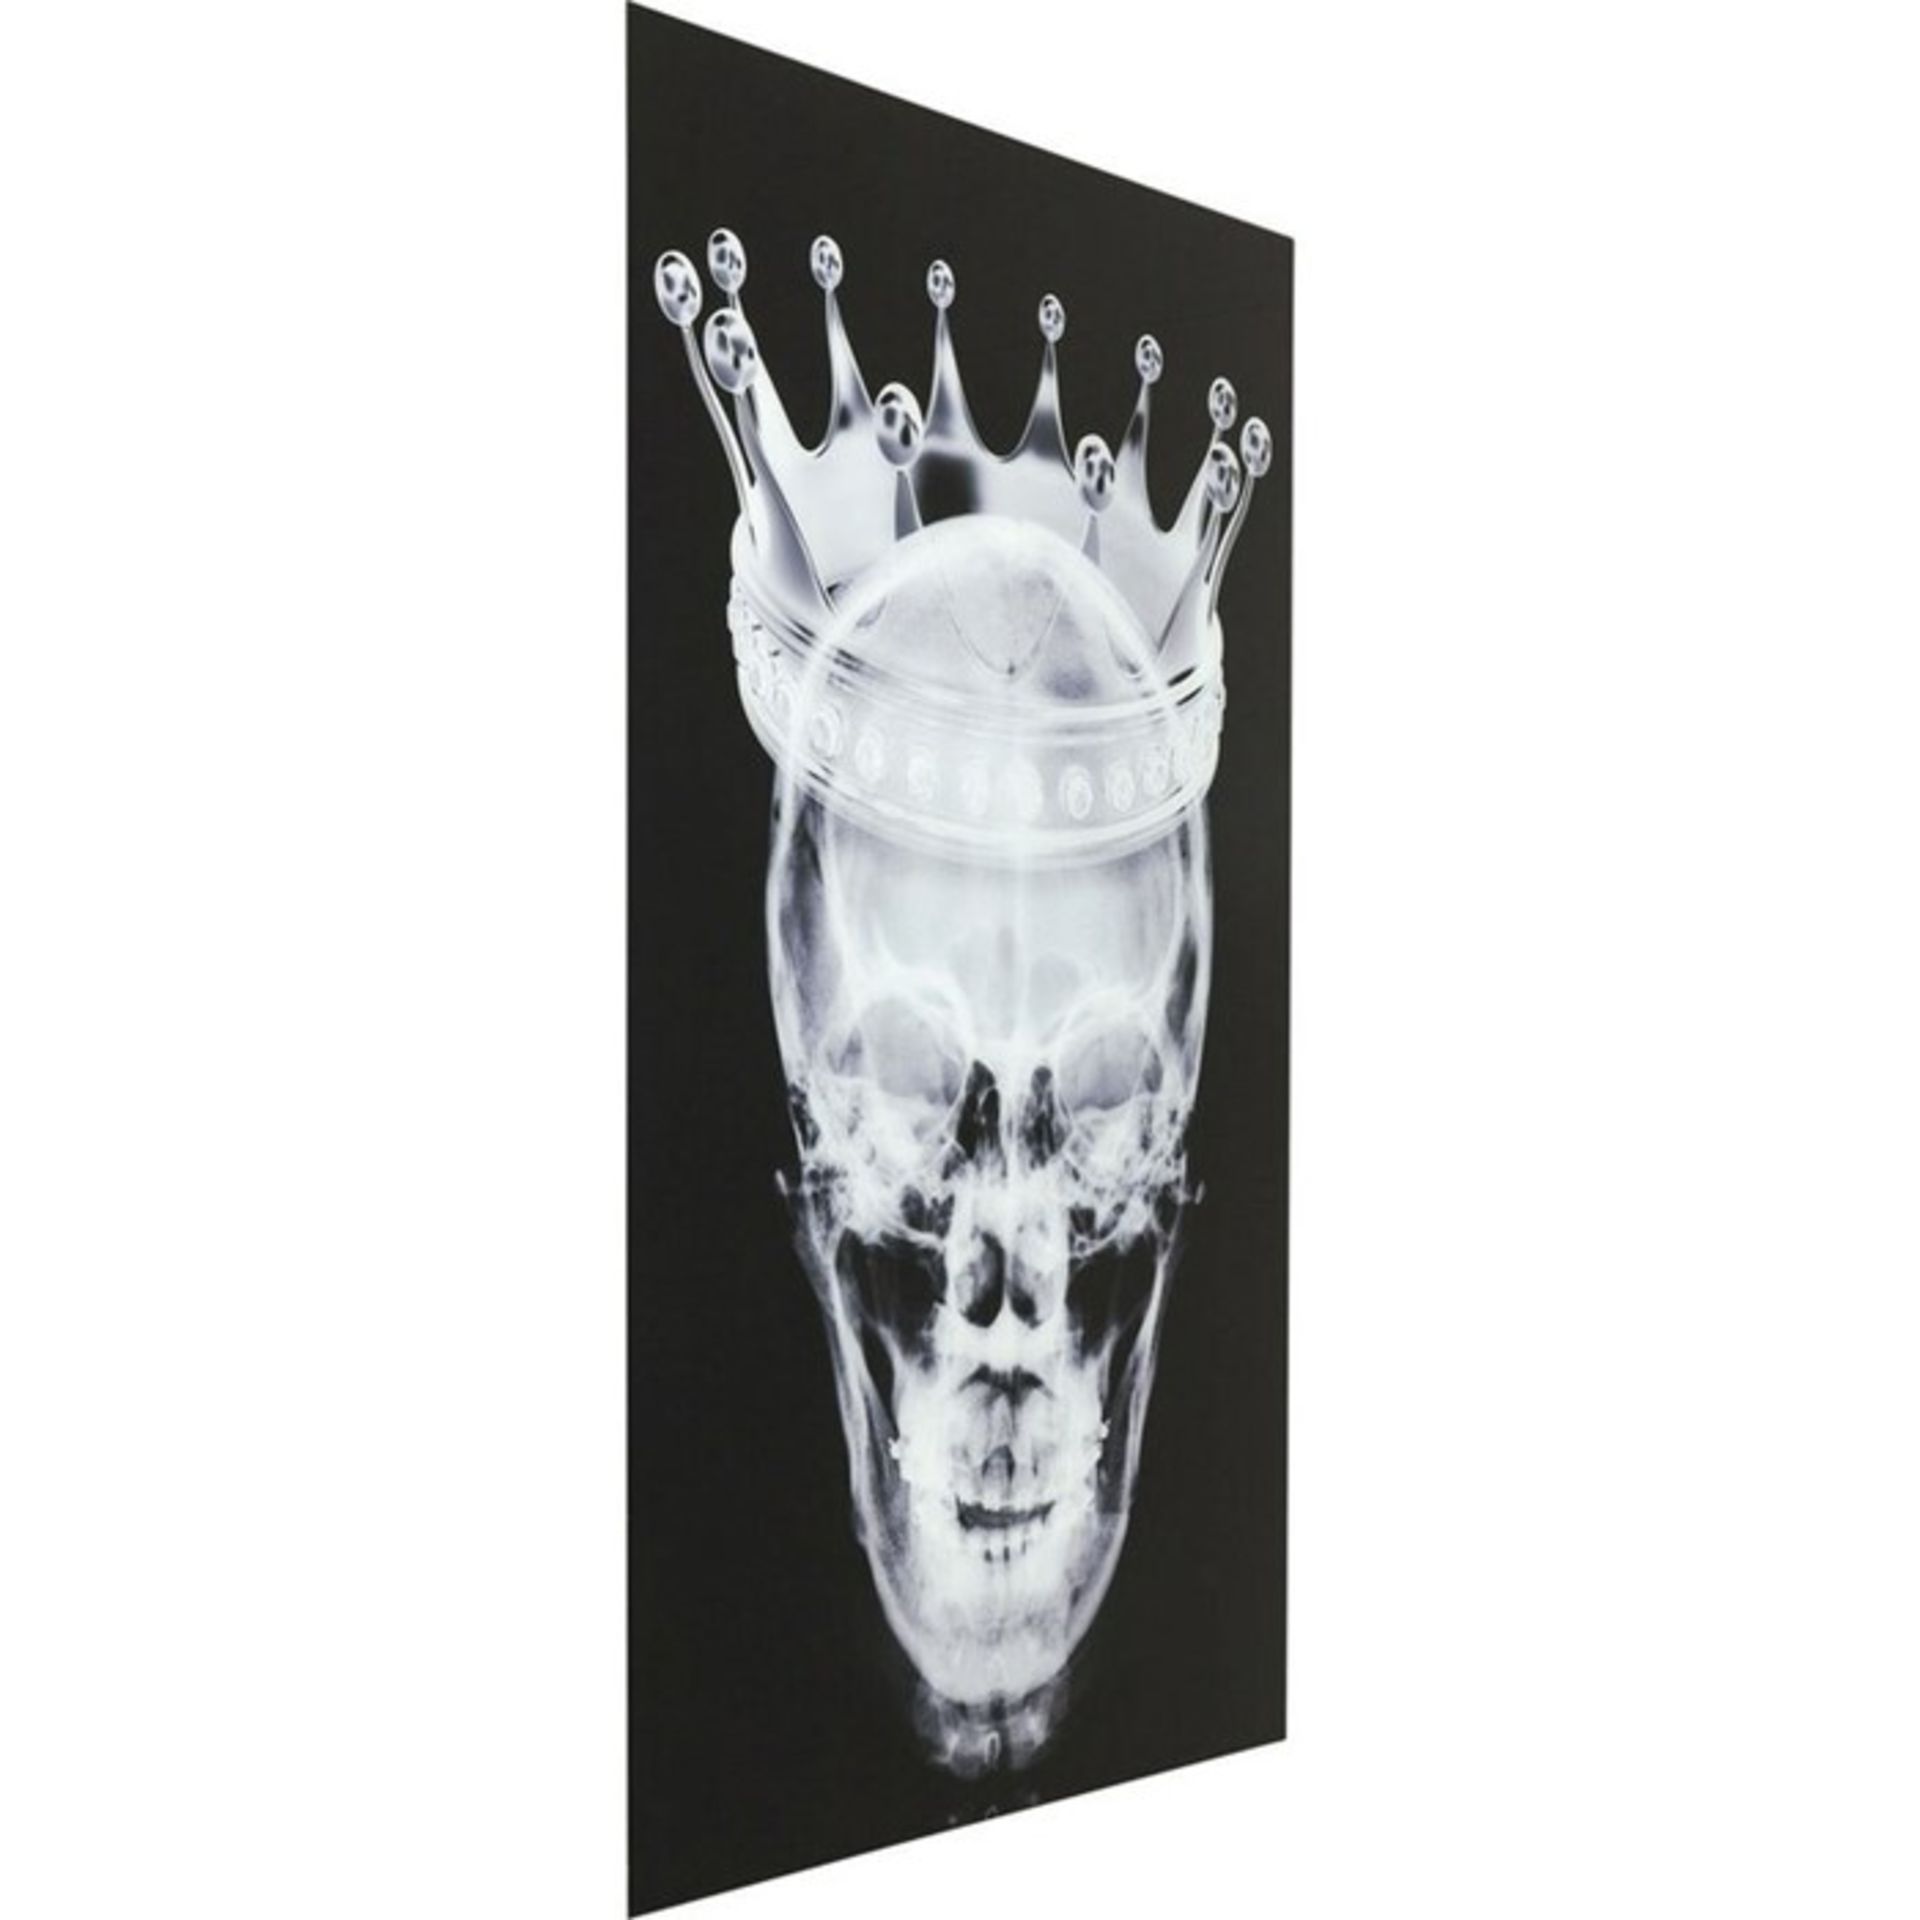 KARE Design, 'Crown Skull' Graphic Art on Glass - RRP £165 (LBHD2538 - 20931/11) 1END